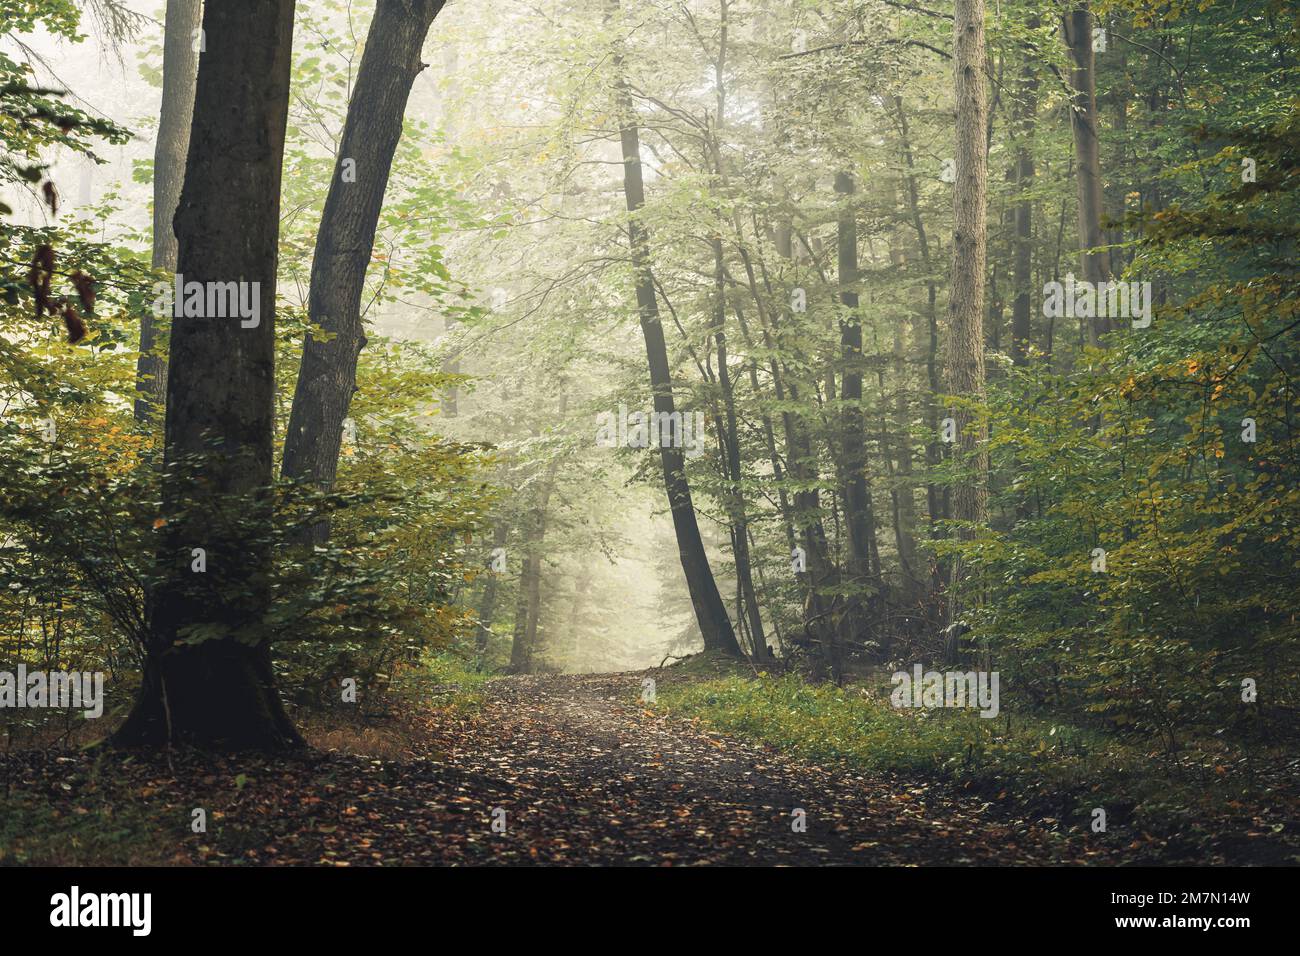 Forest path in Habichtswald near Kassel, autumn leafy trees on a curved path Stock Photo